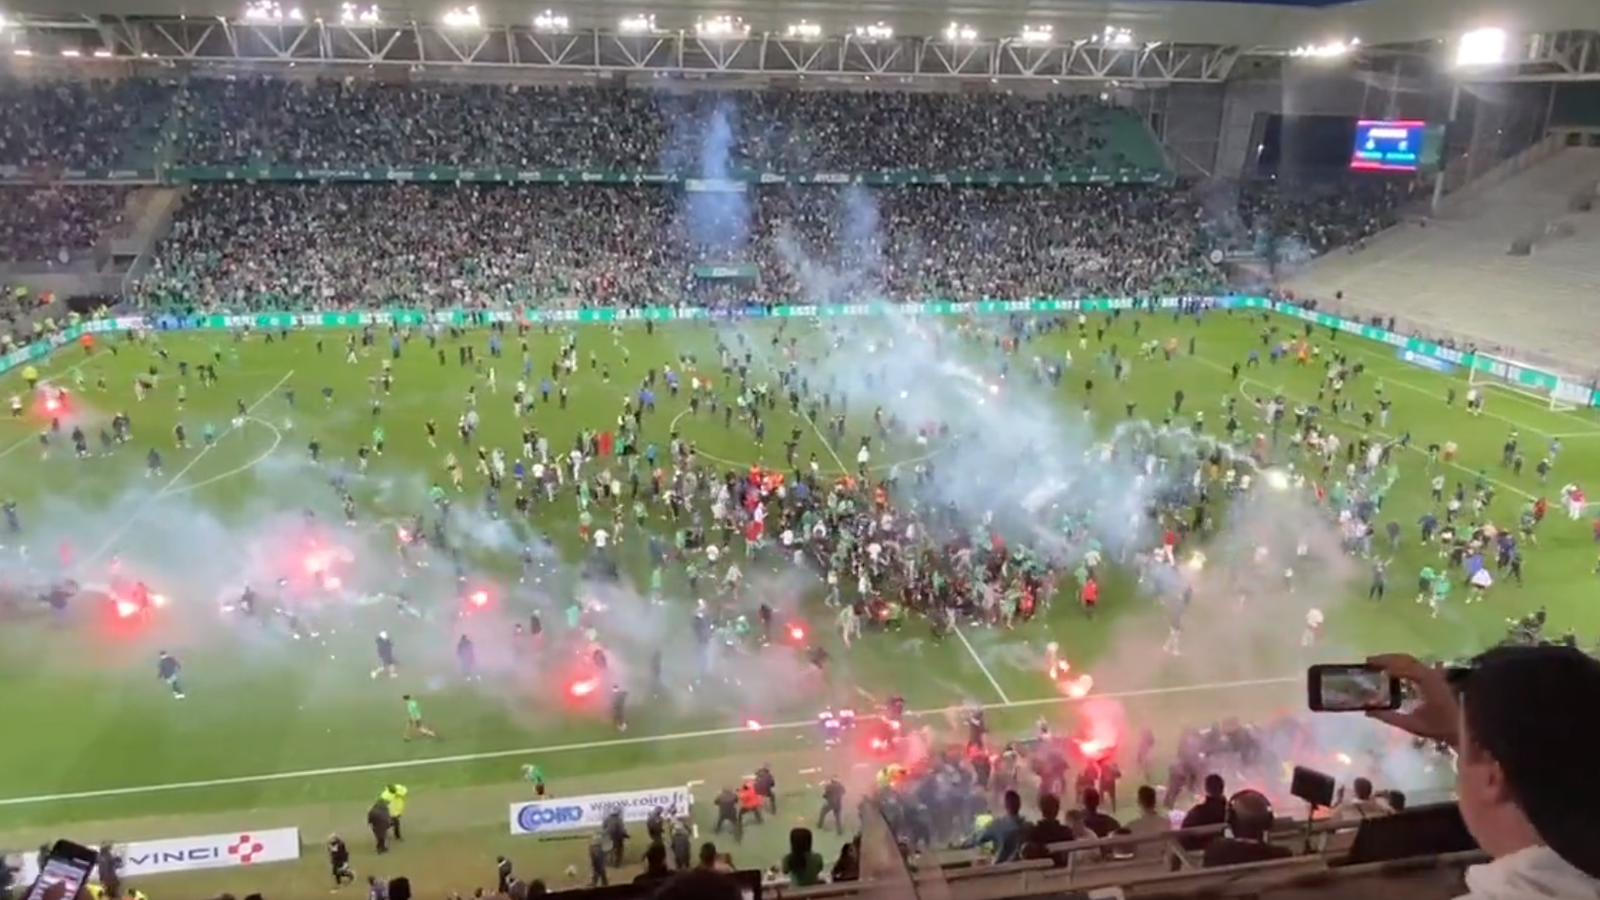 Saint-Etienne vs Auxerre: Angry fans storm pitch and throw flares after relegation | News | Sky